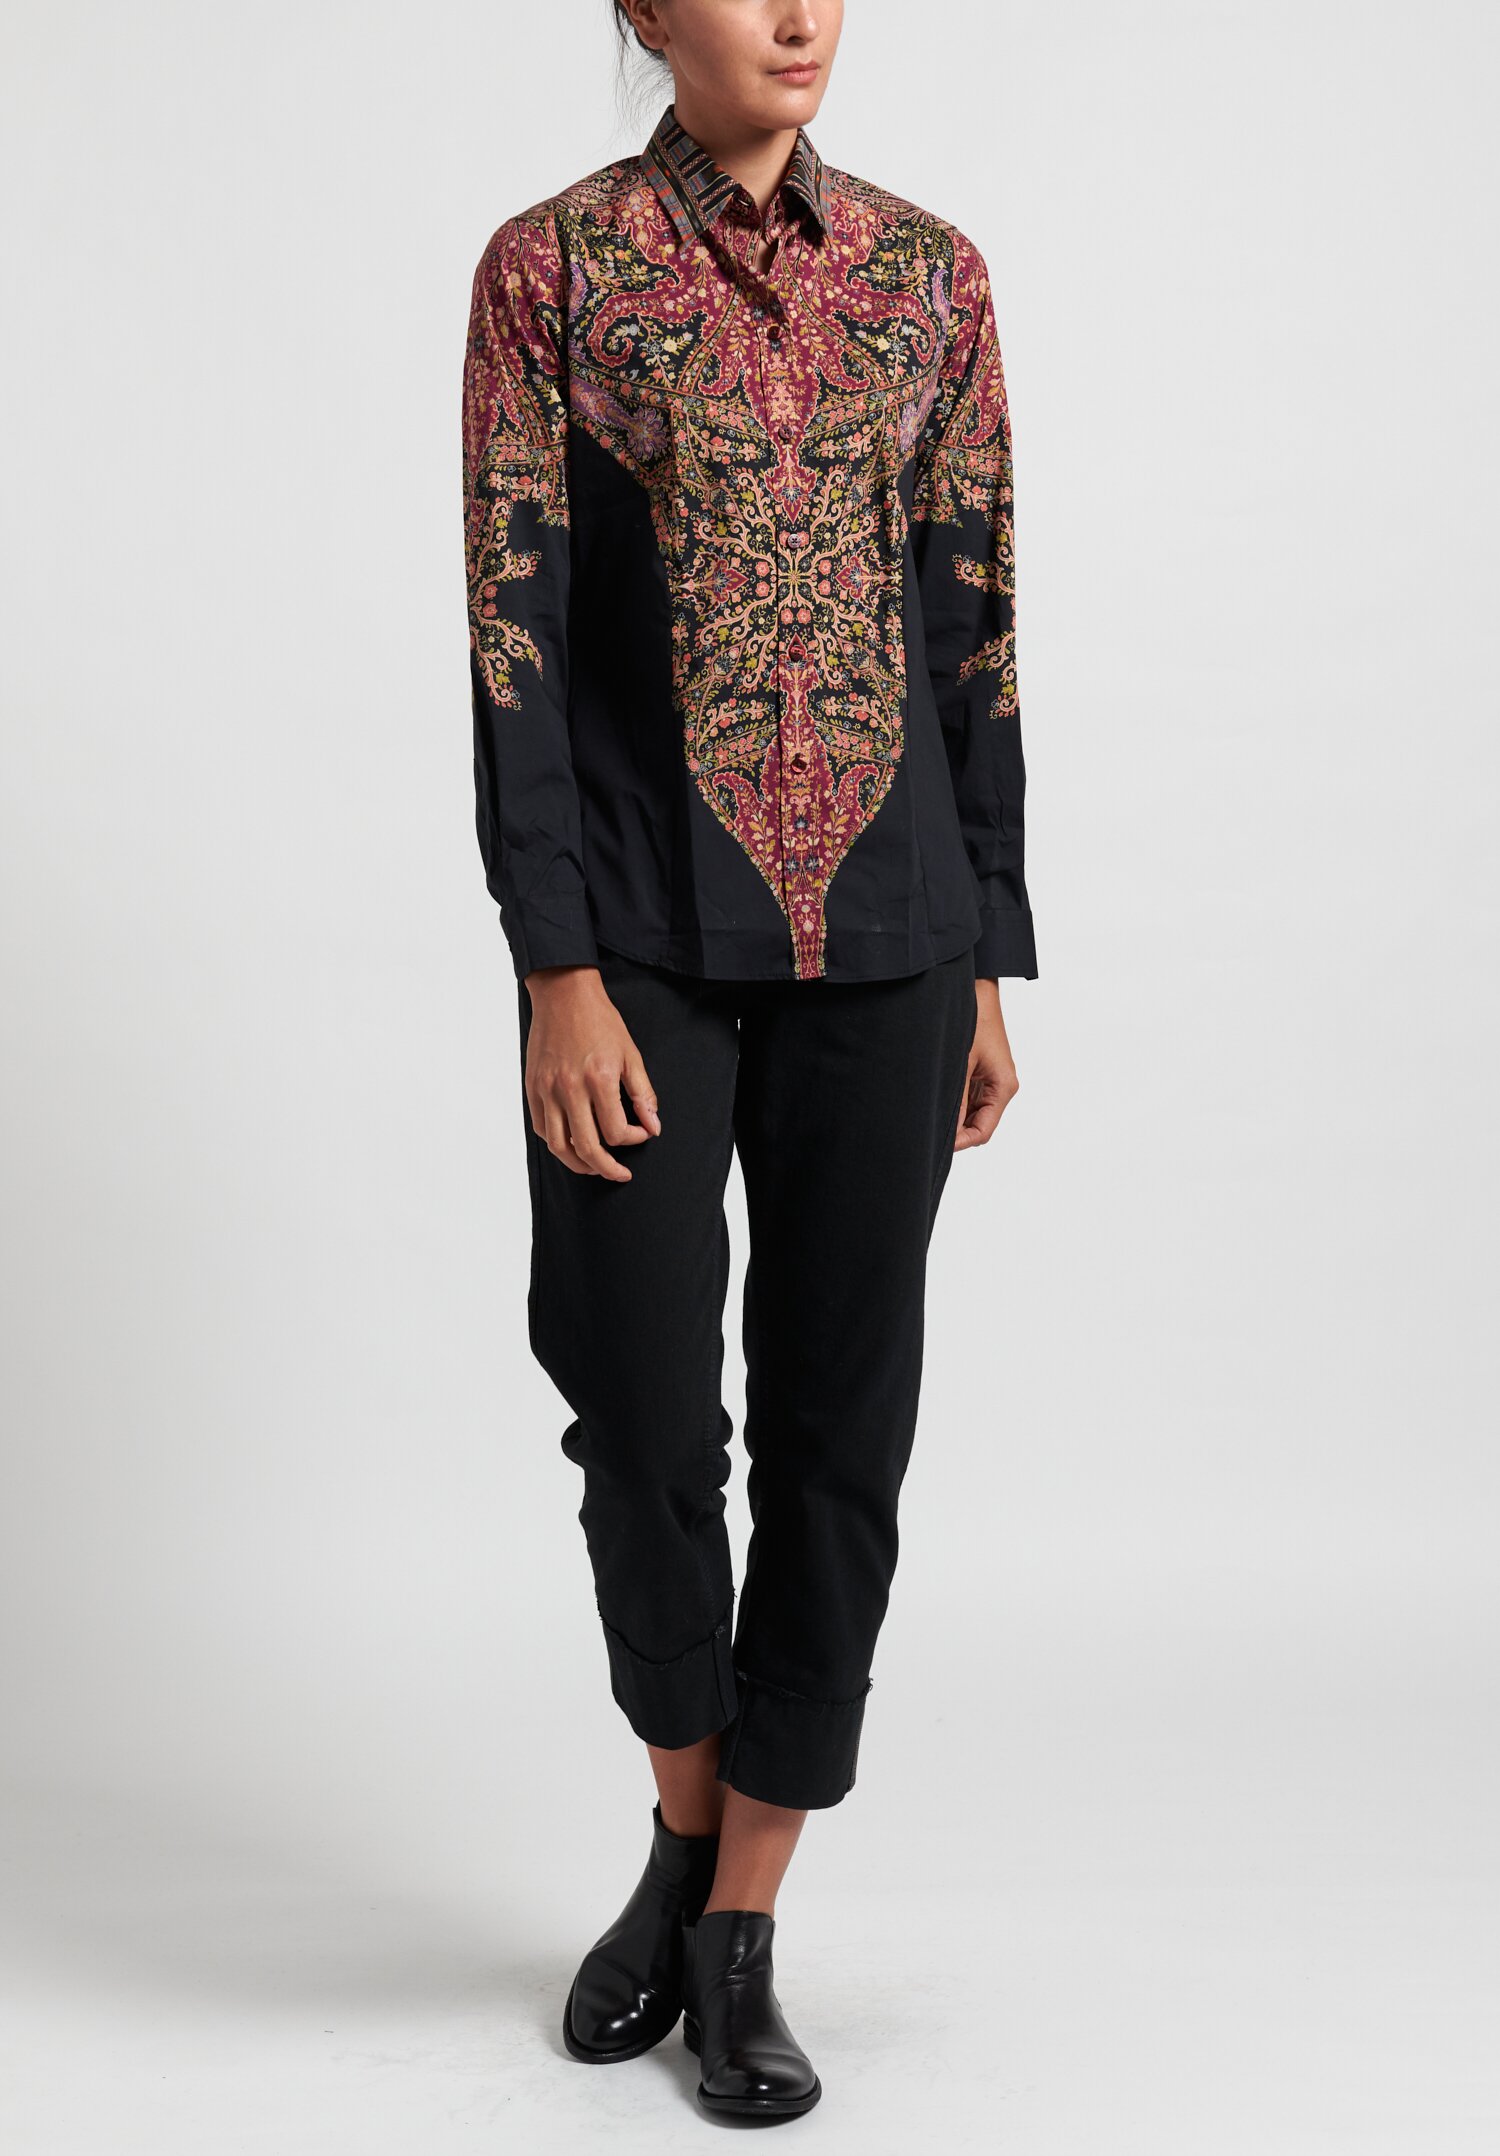 Etro Printed Button Up Shirt in Black Paisley | Santa Fe Dry Goods ...